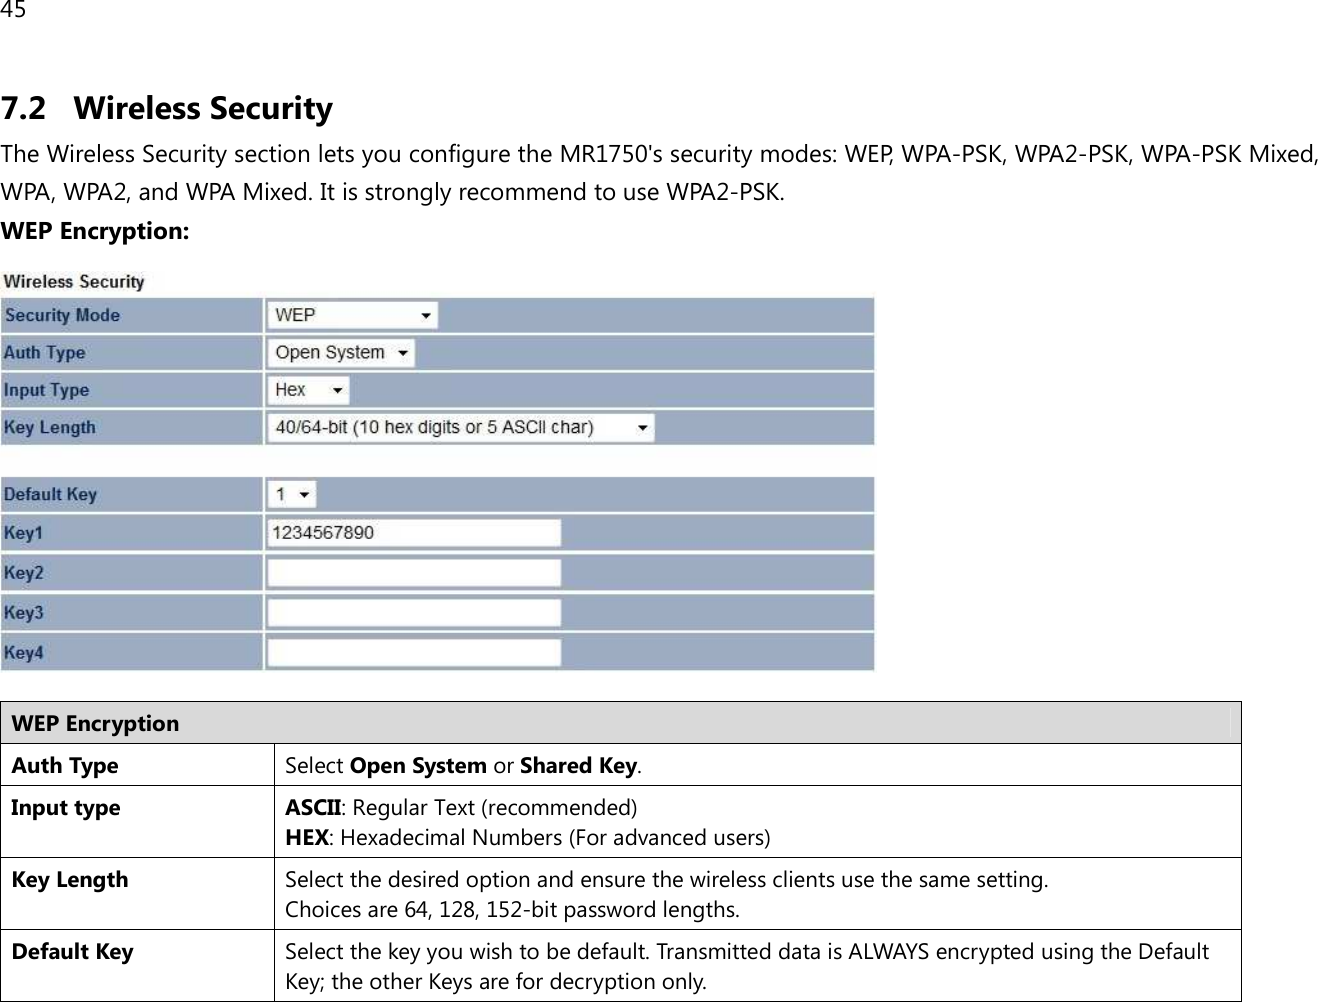 45  7.2 Wireless Security The Wireless Security section lets you configure the MR1750&apos;s security modes: WEP, WPA-PSK, WPA2-PSK, WPA-PSK Mixed, WPA, WPA2, and WPA Mixed. It is strongly recommend to use WPA2-PSK.  WEP Encryption:   WEP Encryption Auth Type Select Open System or Shared Key. Input type ASCII: Regular Text (recommended) HEX: Hexadecimal Numbers (For advanced users) Key Length Select the desired option and ensure the wireless clients use the same setting. Choices are 64, 128, 152-bit password lengths. Default Key Select the key you wish to be default. Transmitted data is ALWAYS encrypted using the Default Key; the other Keys are for decryption only.  